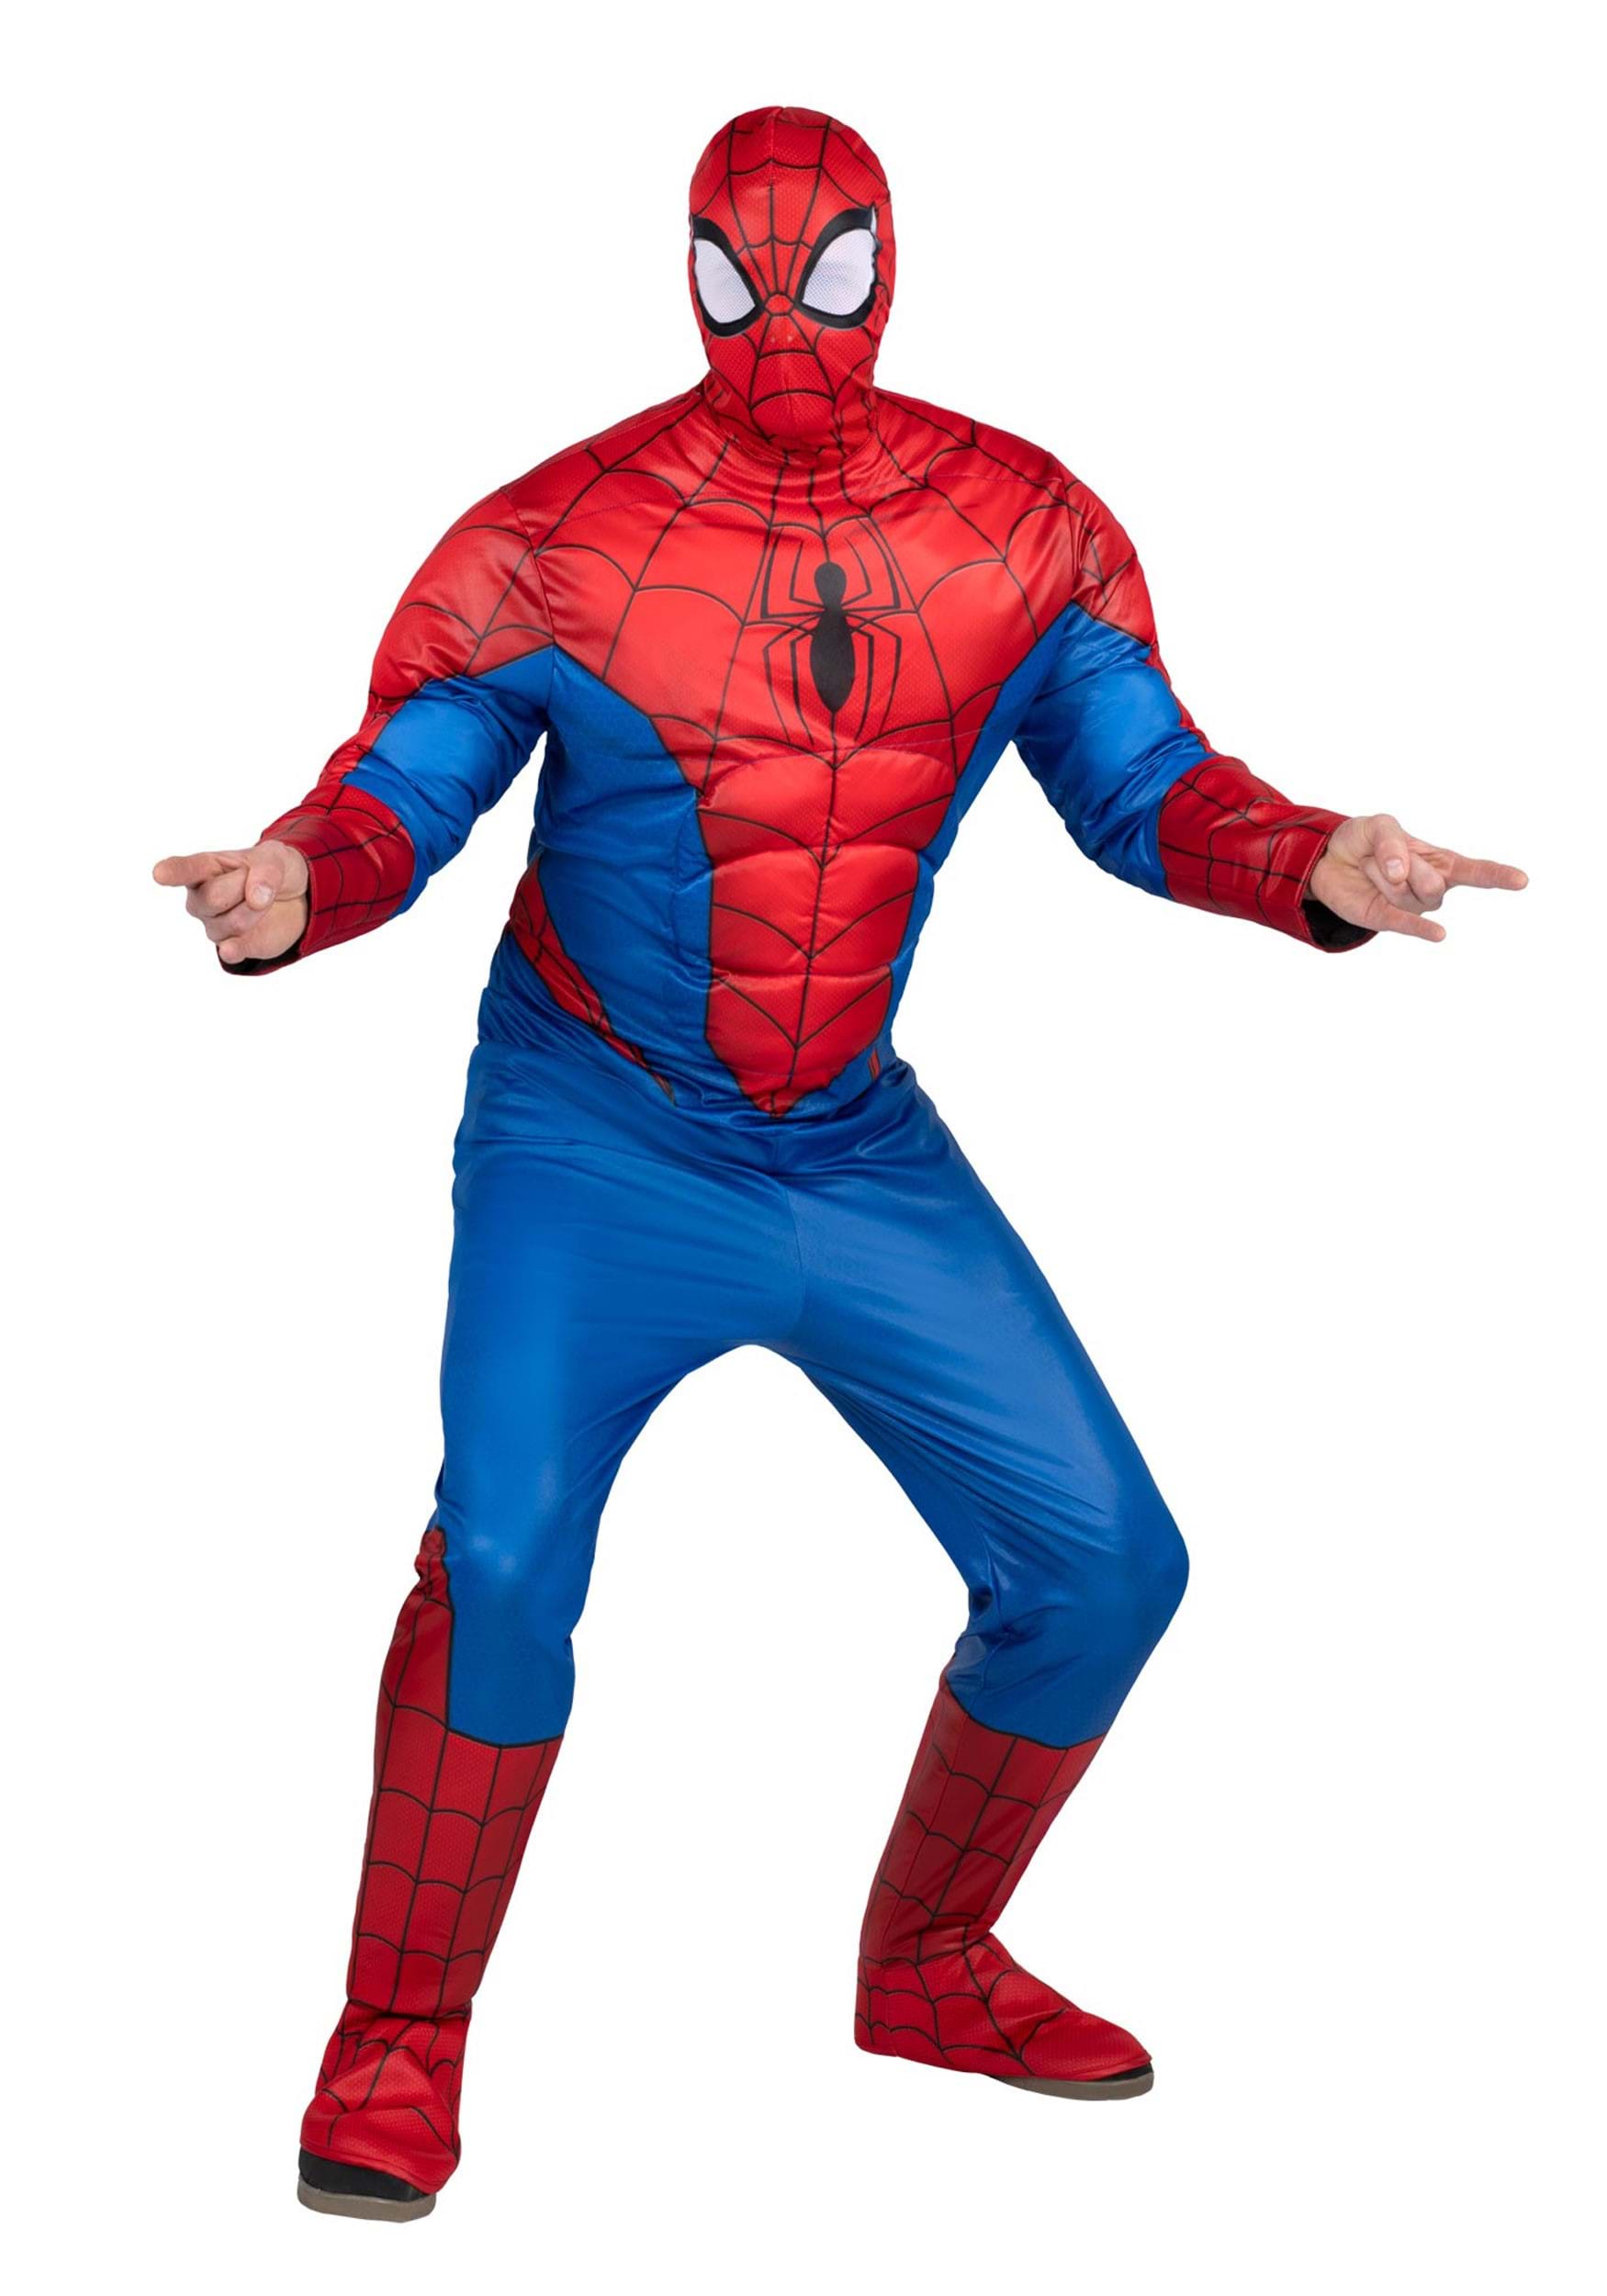 Photos - Fancy Dress Jazwares Spider-Man Costume for Adults Blue/Red JWC0963 